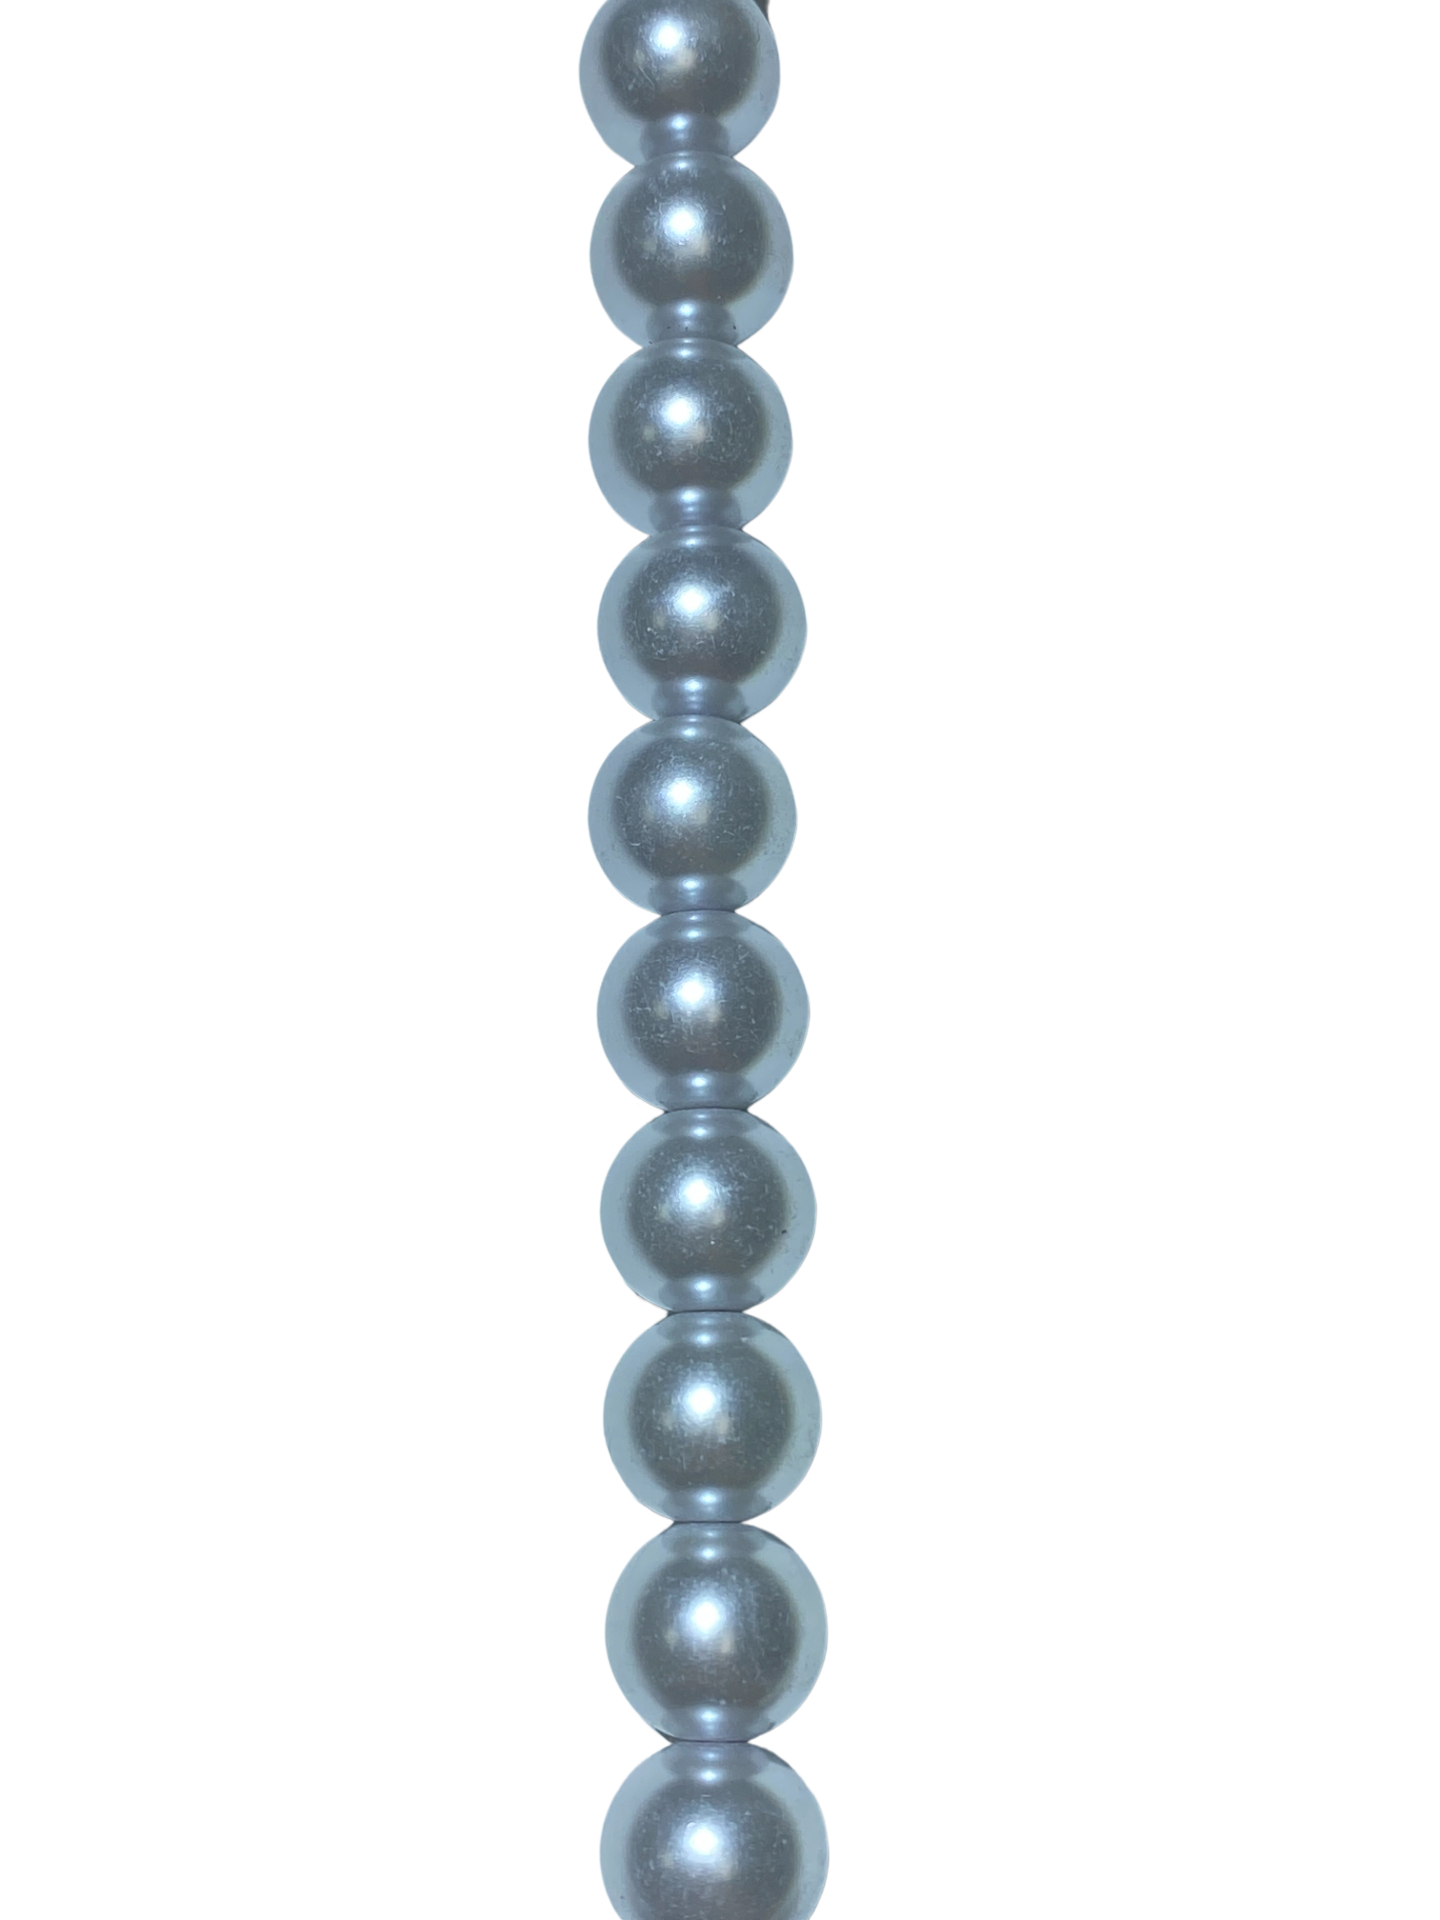 10mm Glass Pearl - Round/ Smooth